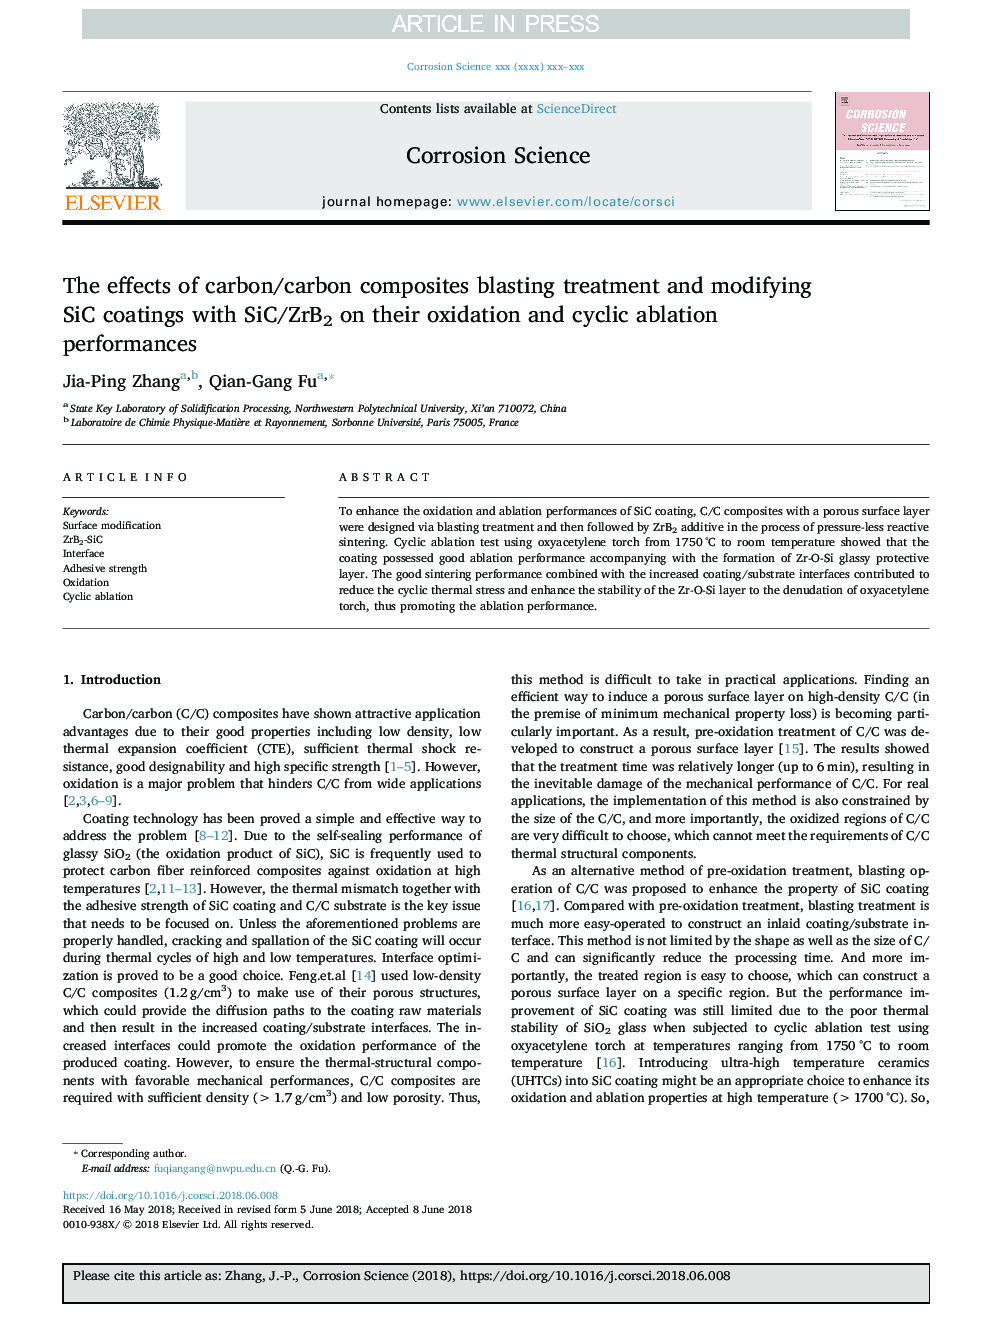 The effects of carbon/carbon composites blasting treatment and modifying SiC coatings with SiC/ZrB2 on their oxidation and cyclic ablation performances